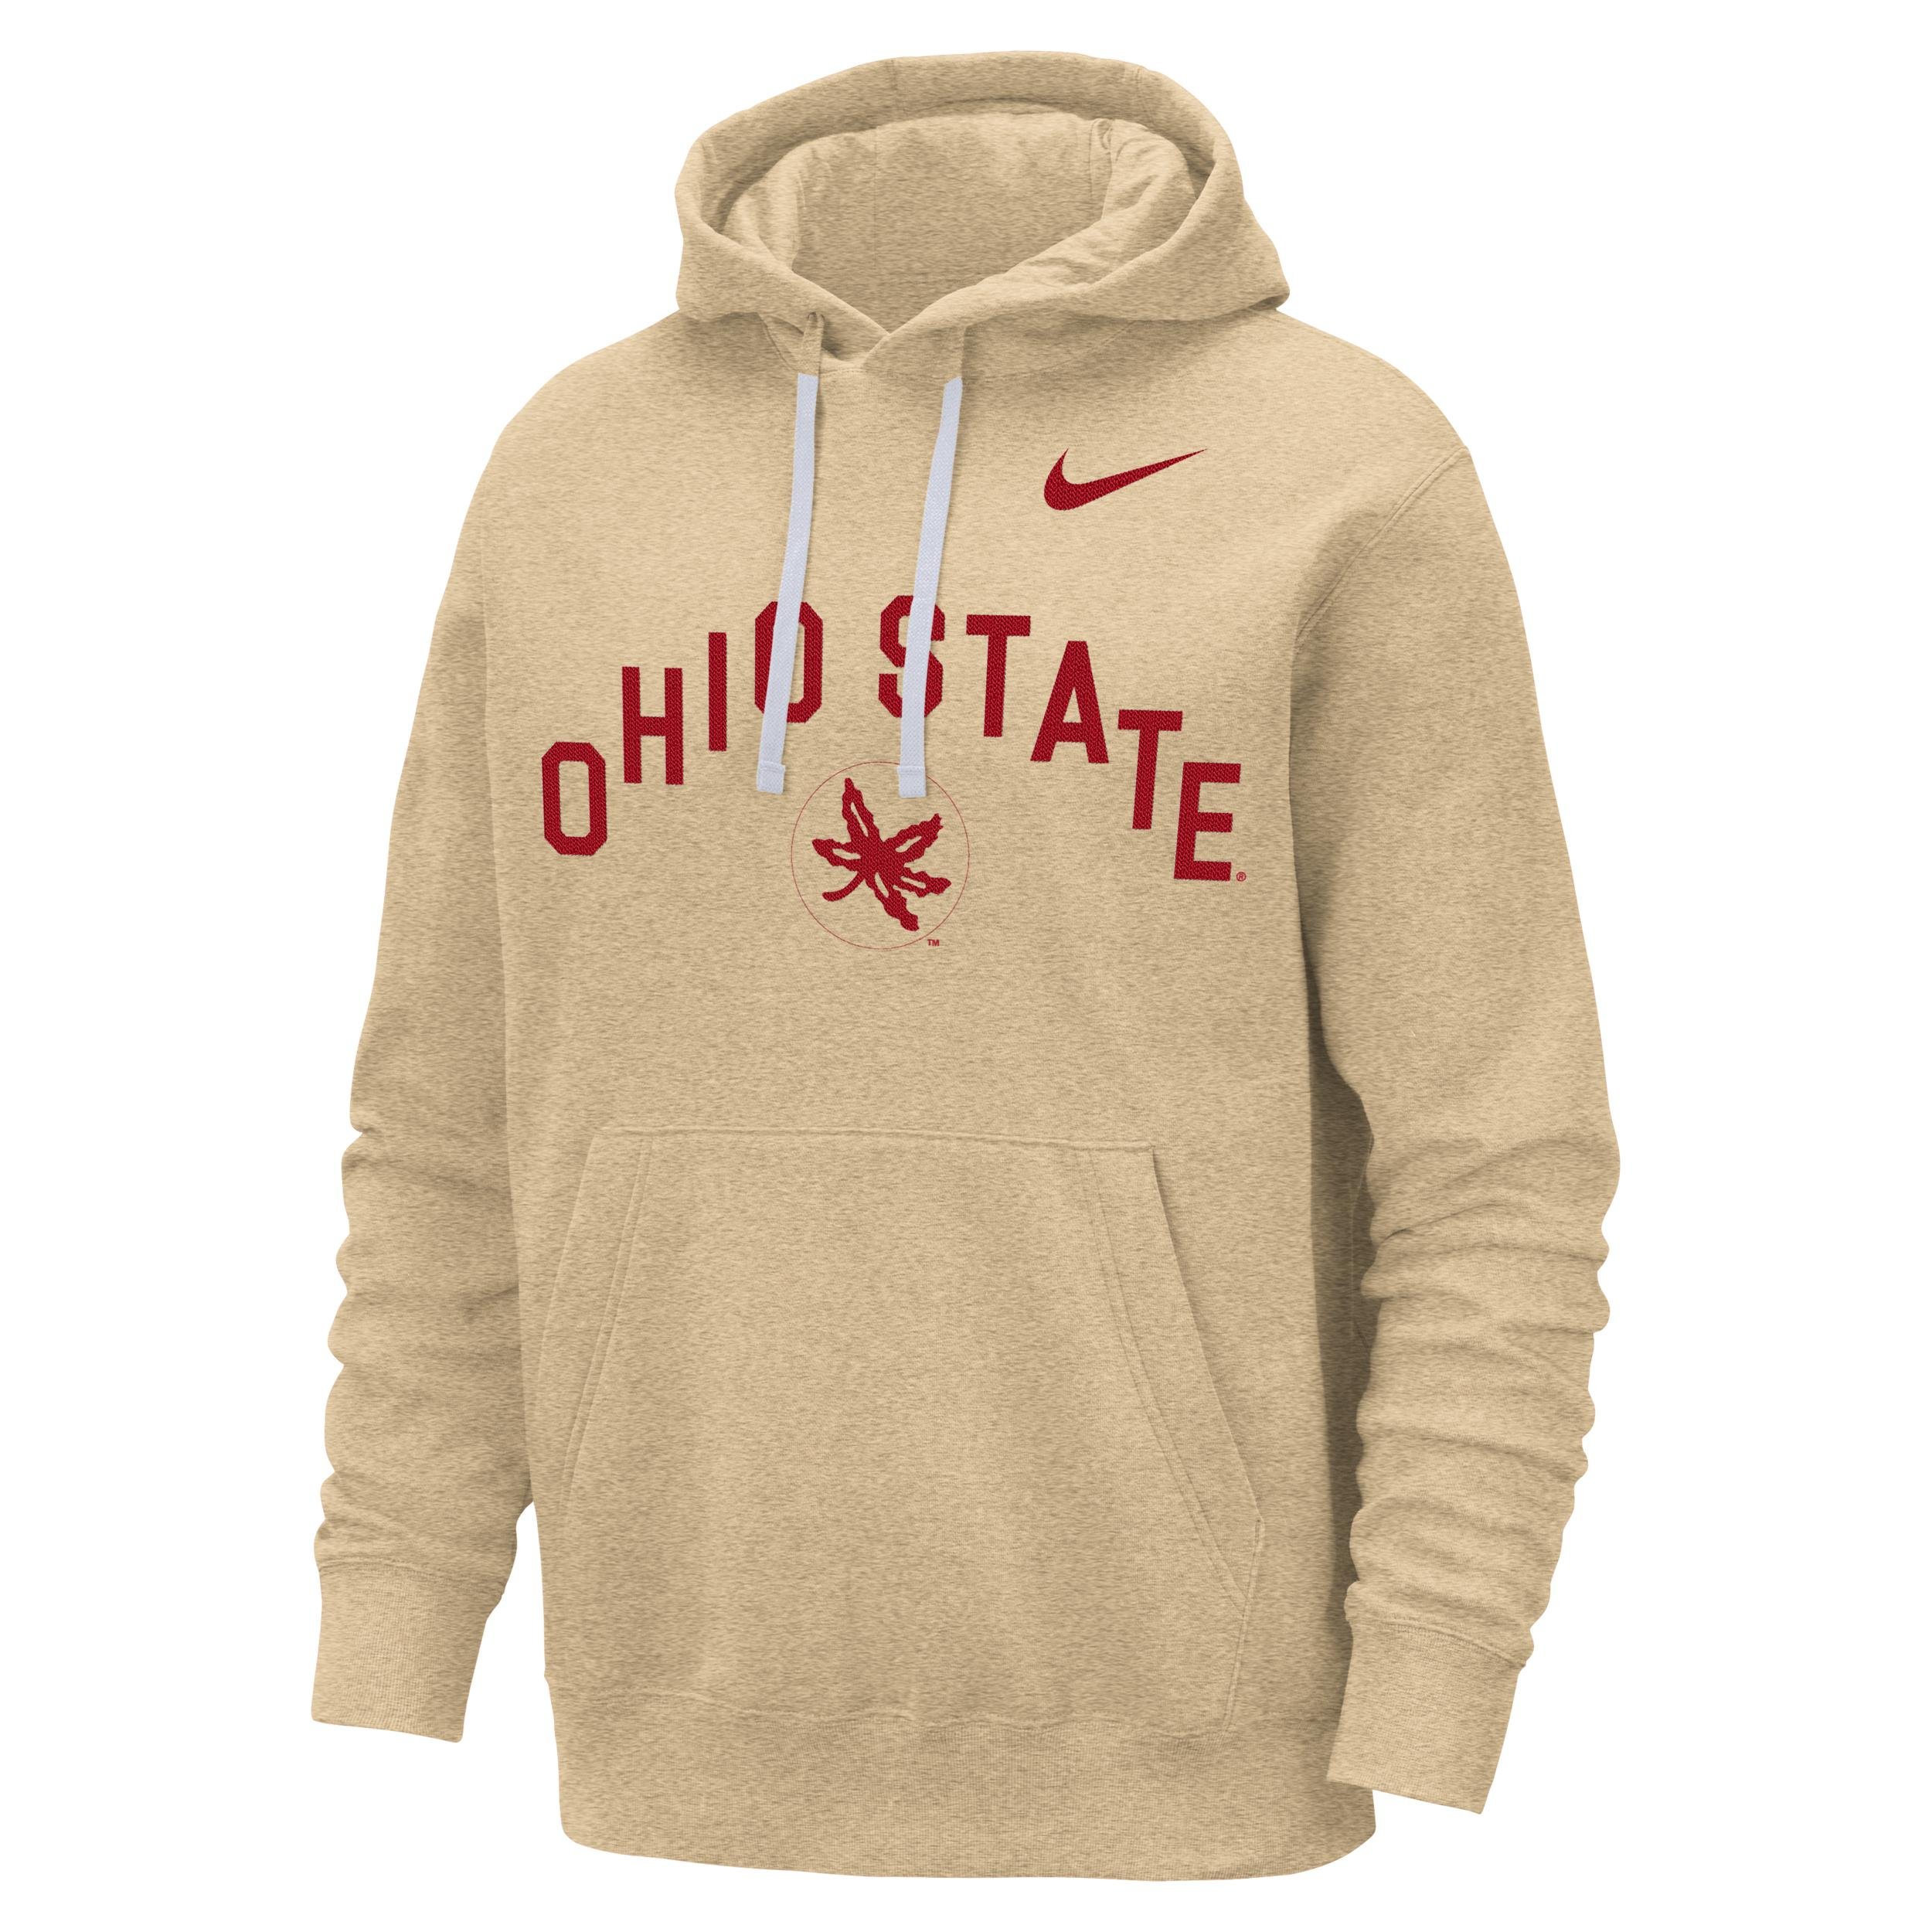 Ohio State Club Fleece Nike Men's College Pullover Hoodie by NIKE